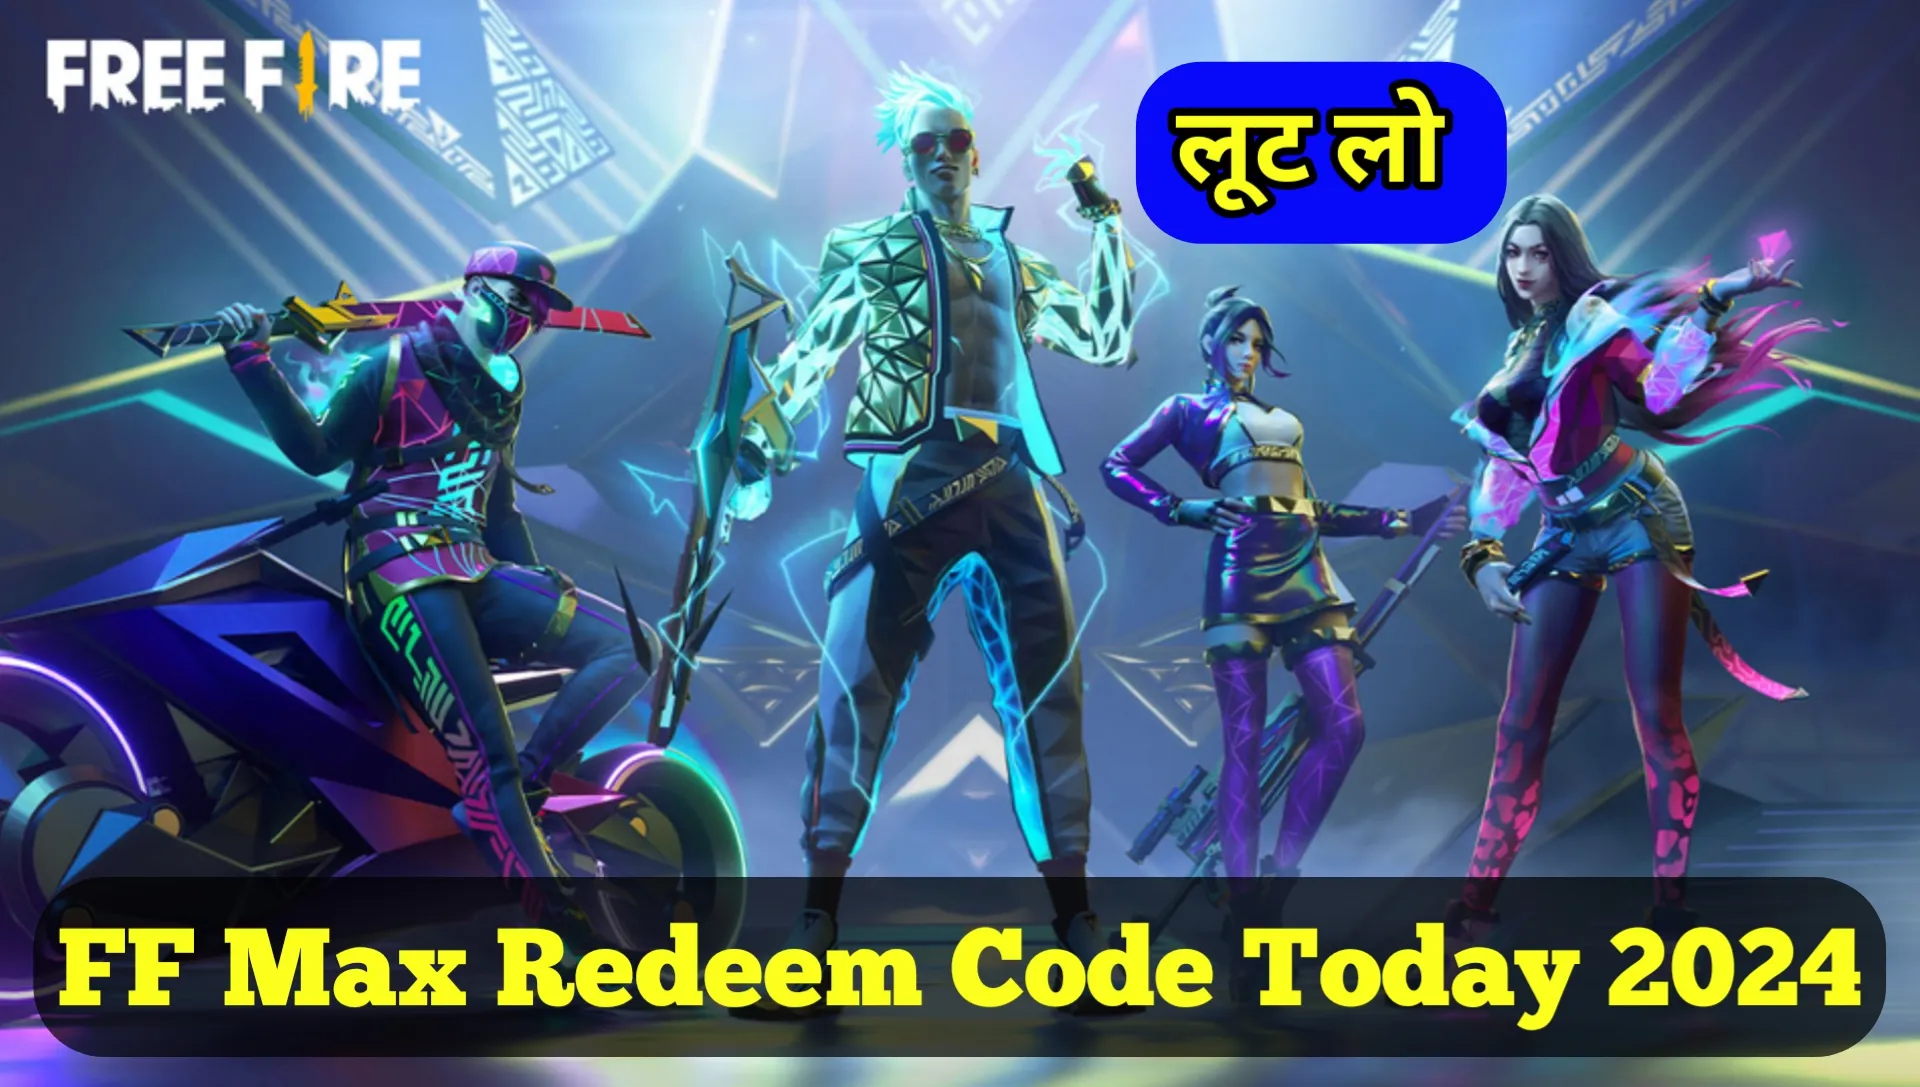 FF Max Redeem Code Today 2024